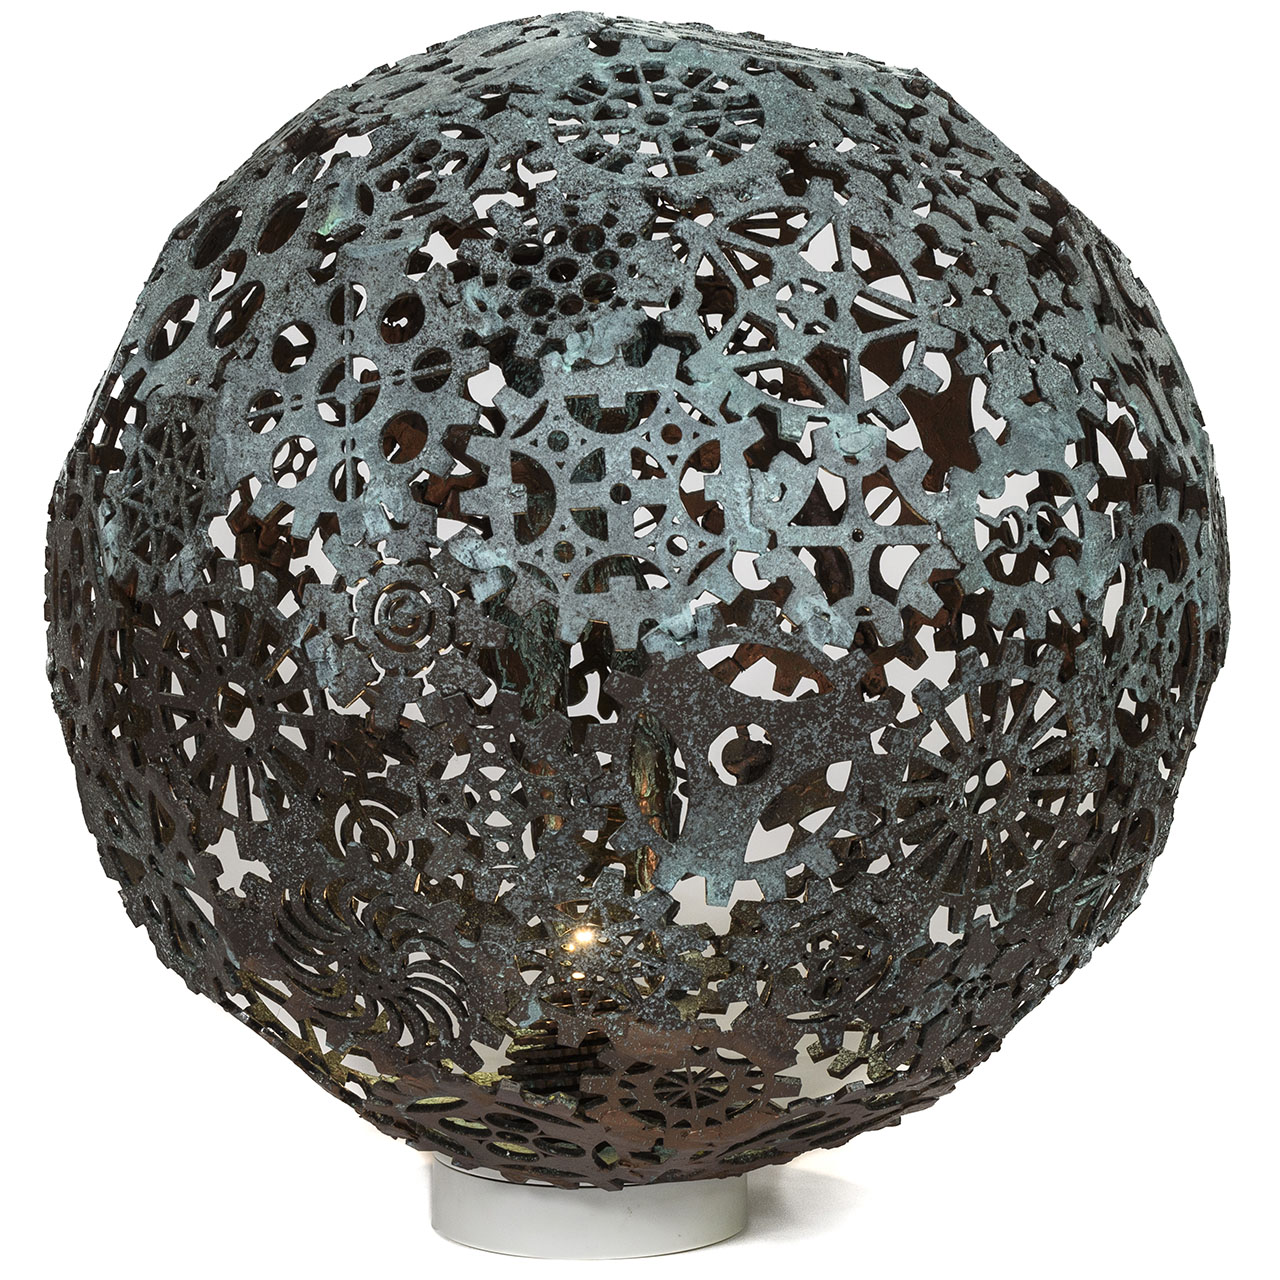 large metal sphere with patterned cut-outs sitting on stand.